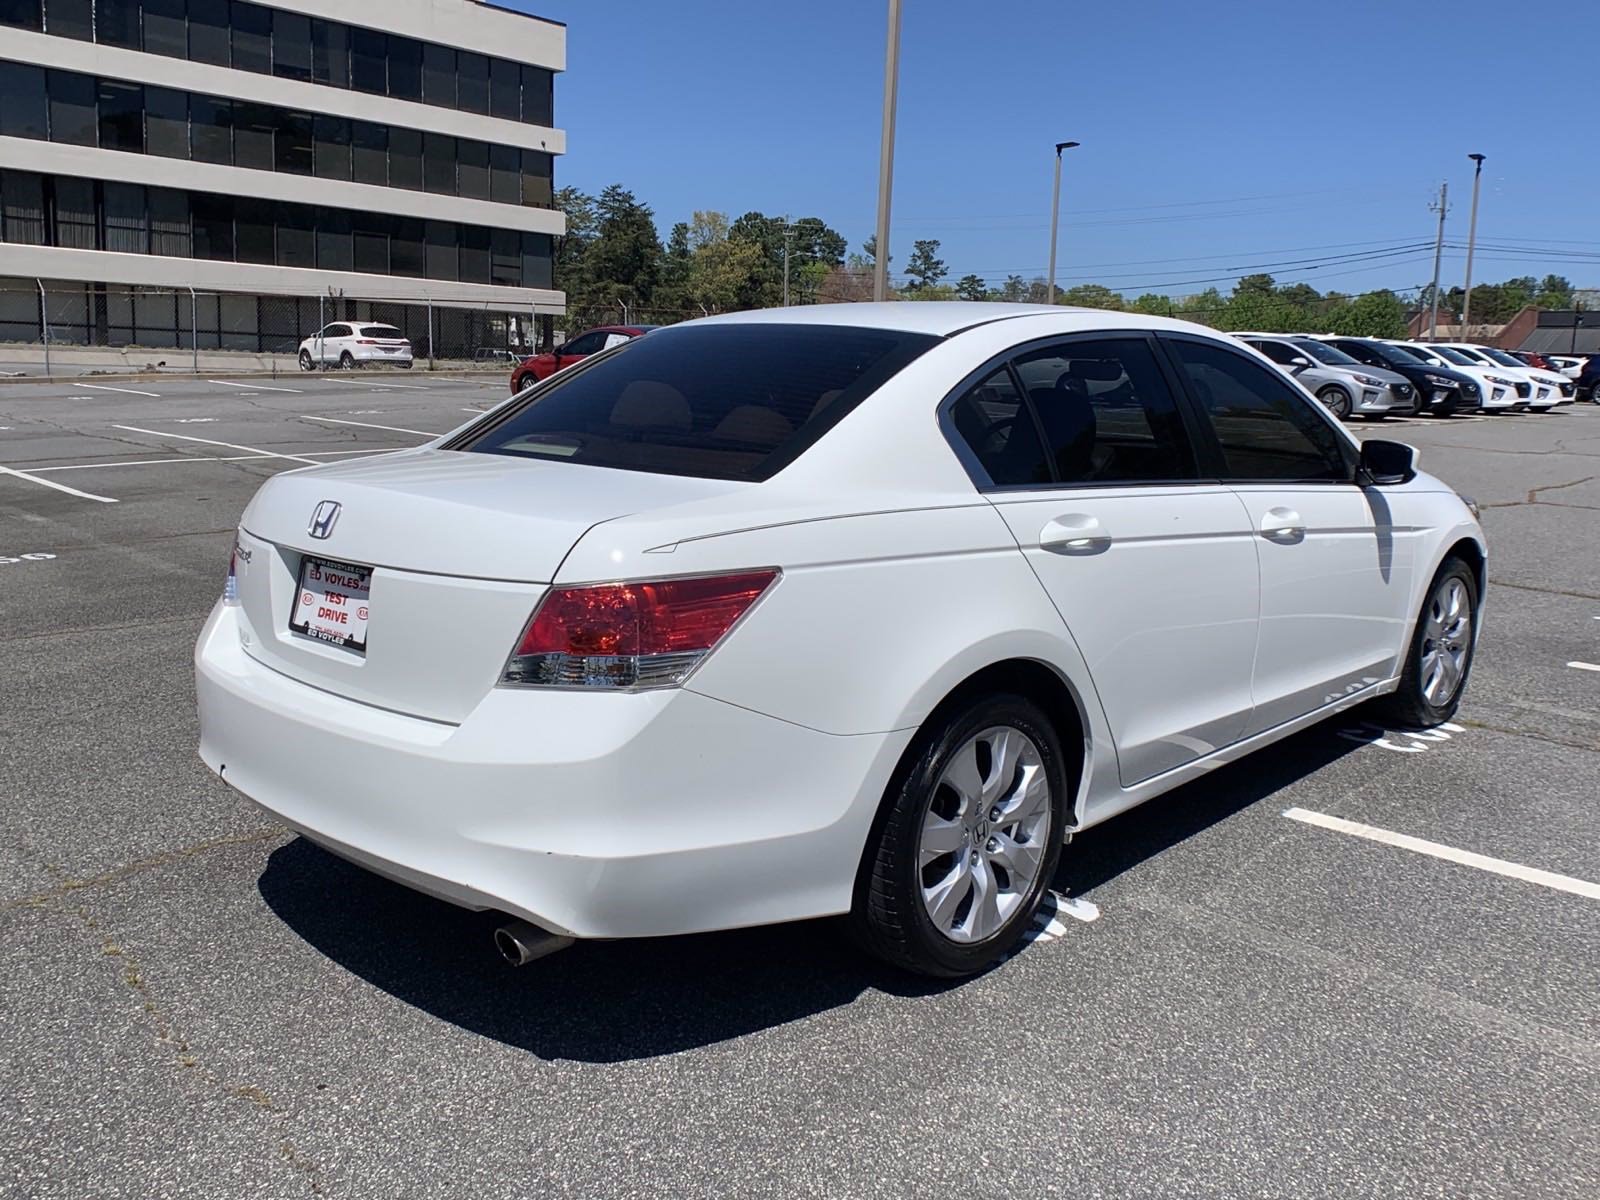 Pre-Owned 2009 Honda Accord Sdn LX FWD 4dr Car